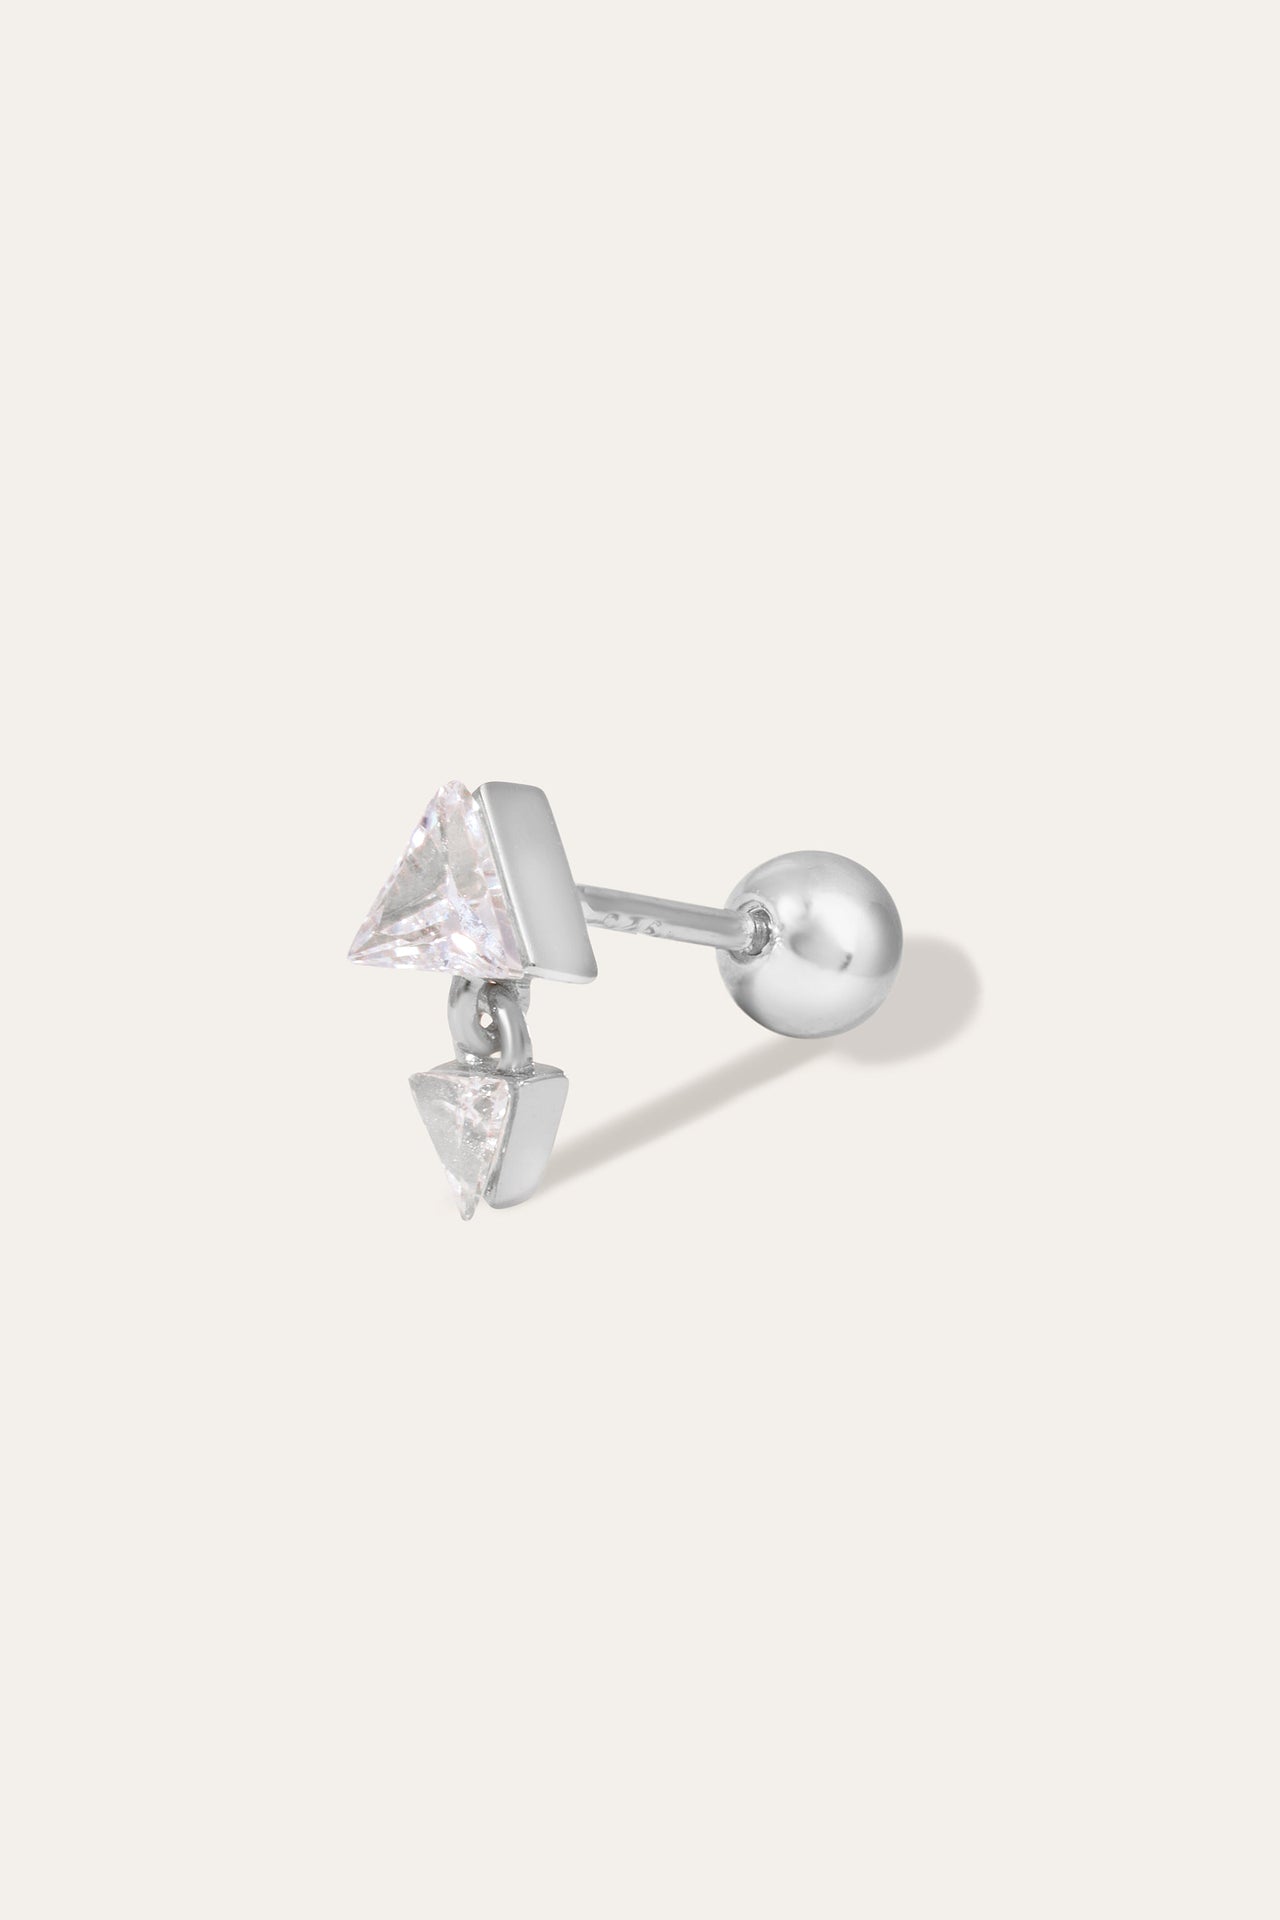 Floating Pyramid Silver Stud Earring (ball screw)